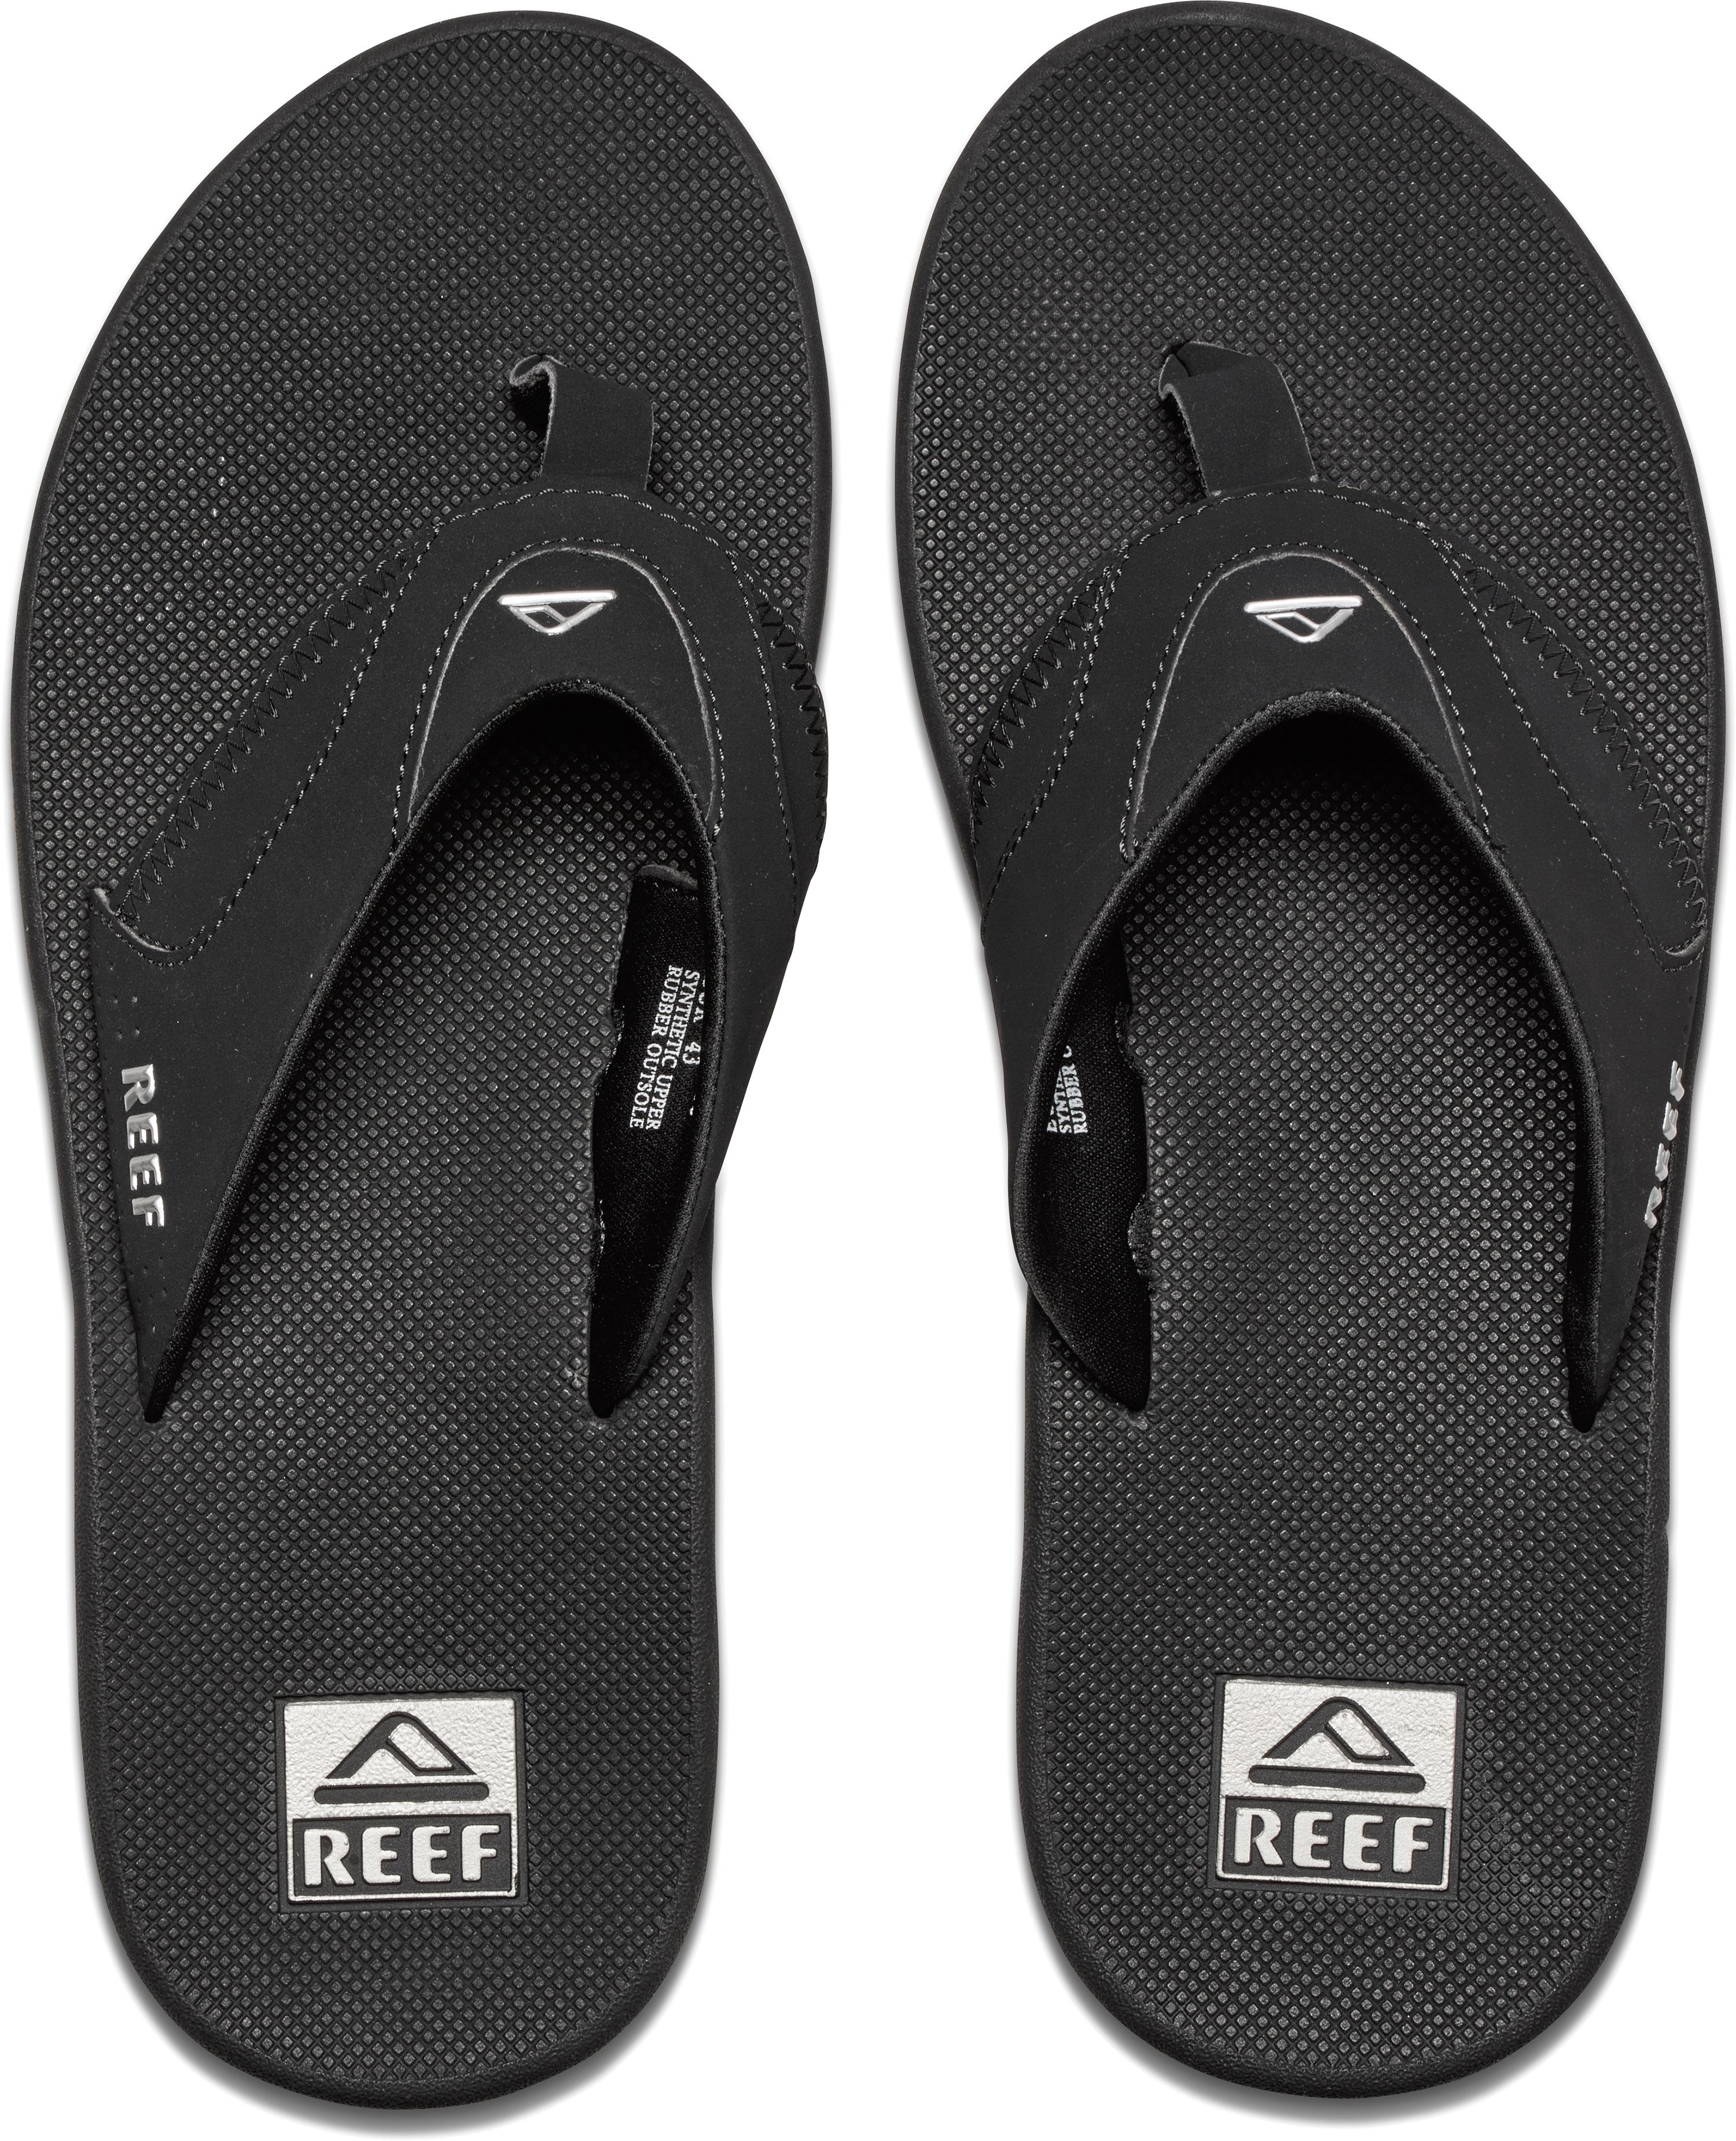 Reef Flip UK Stock, Shipped from Cornwall -